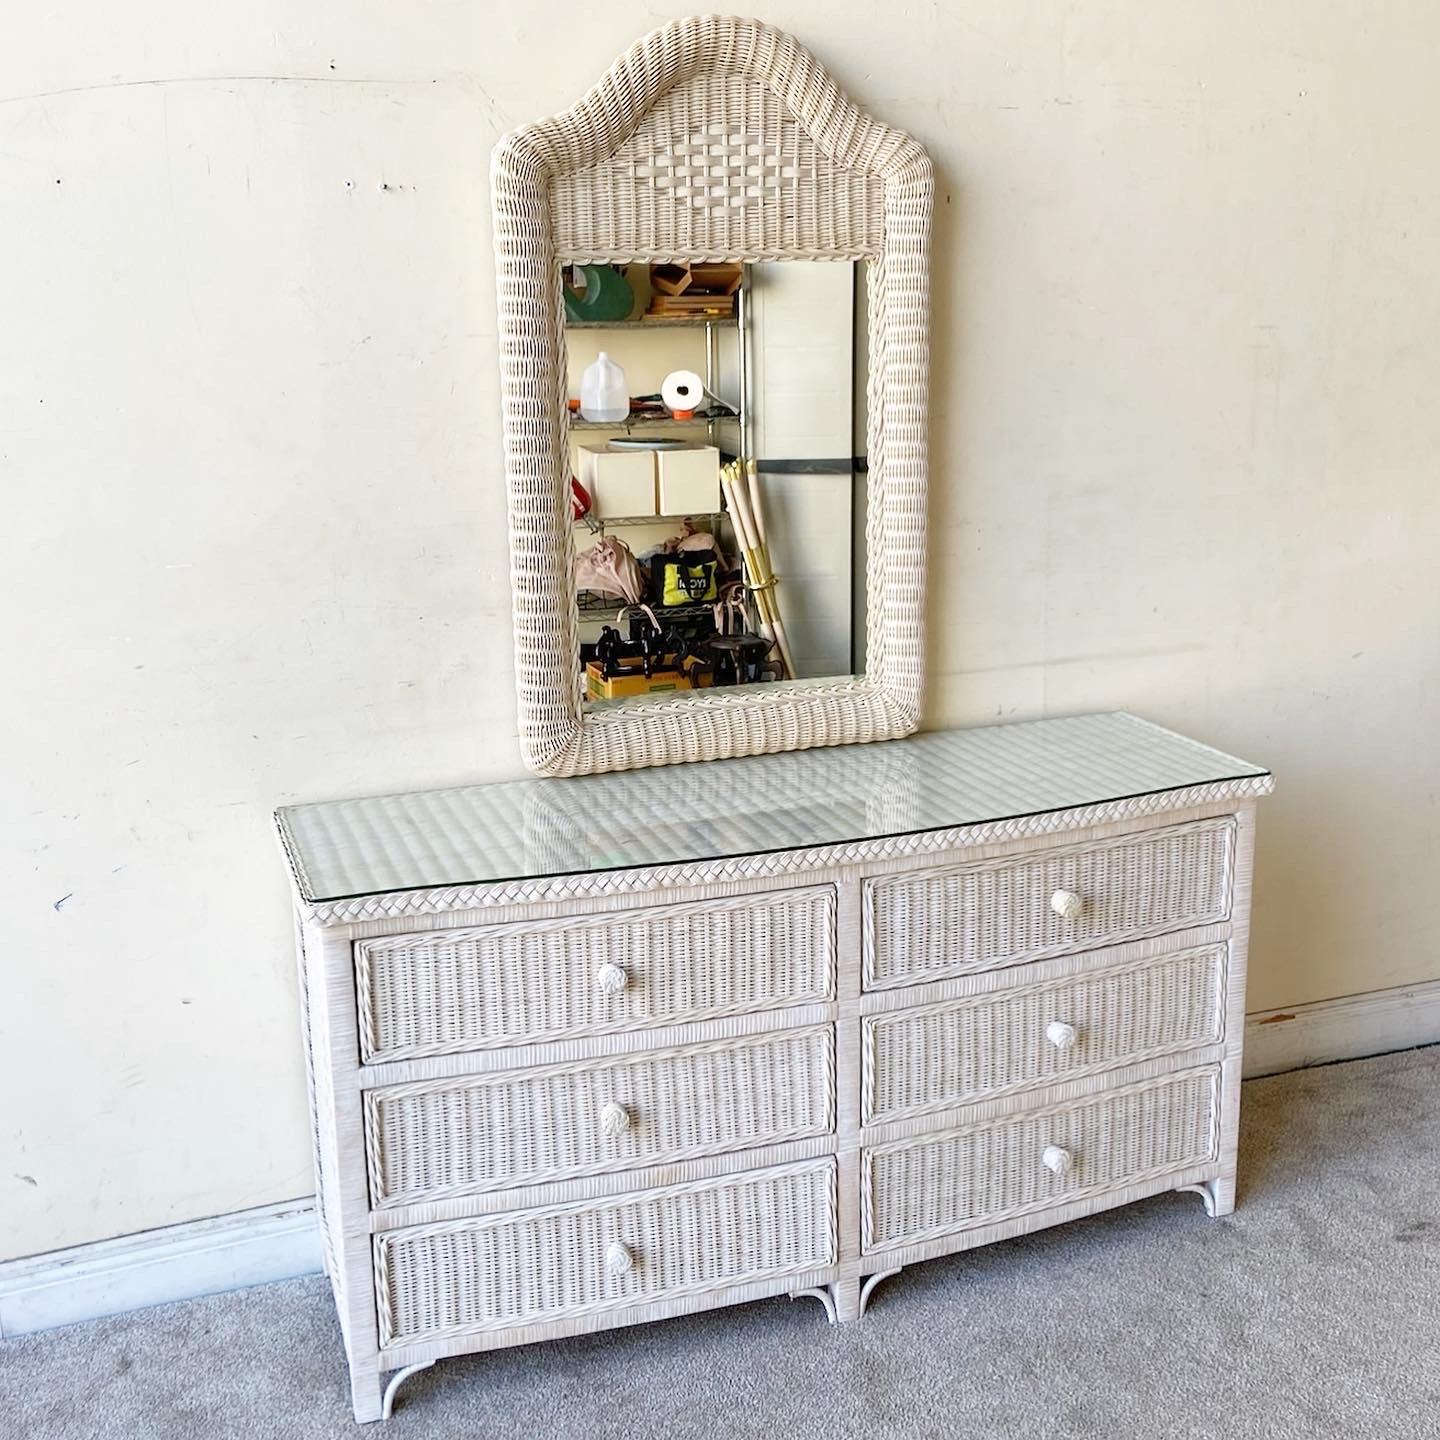 Amazing vintage boho chic wicker dresser with a matching mirror and glass top. Feature an off white finish with 6 spacious drawers.

Mirror measures 28”W, 2.5”D, 44.5”H.